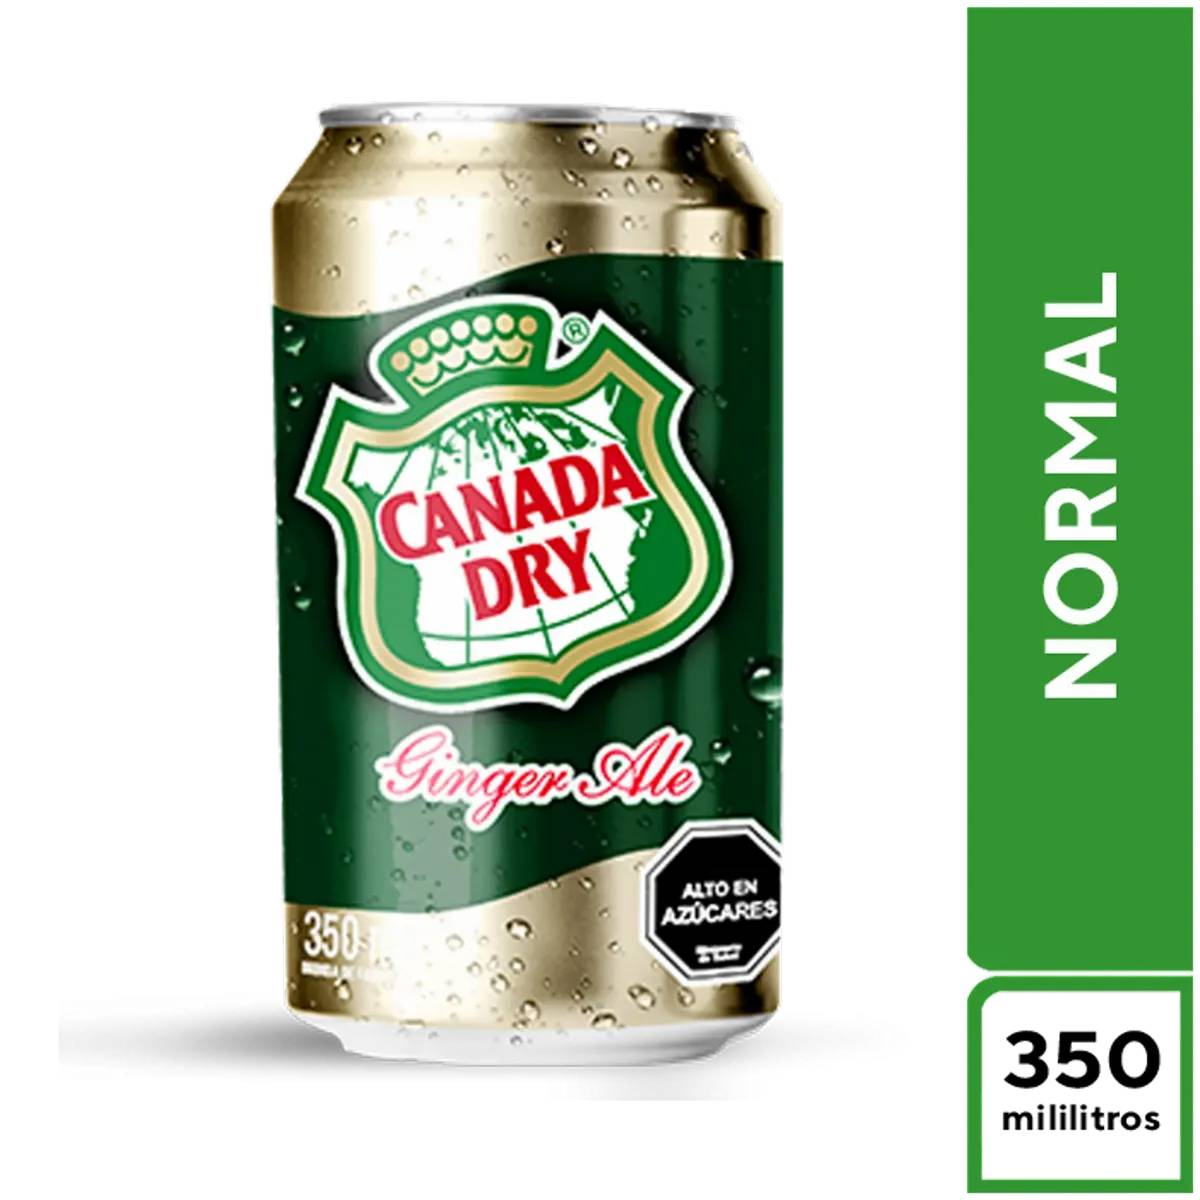 Canada Dry Normal